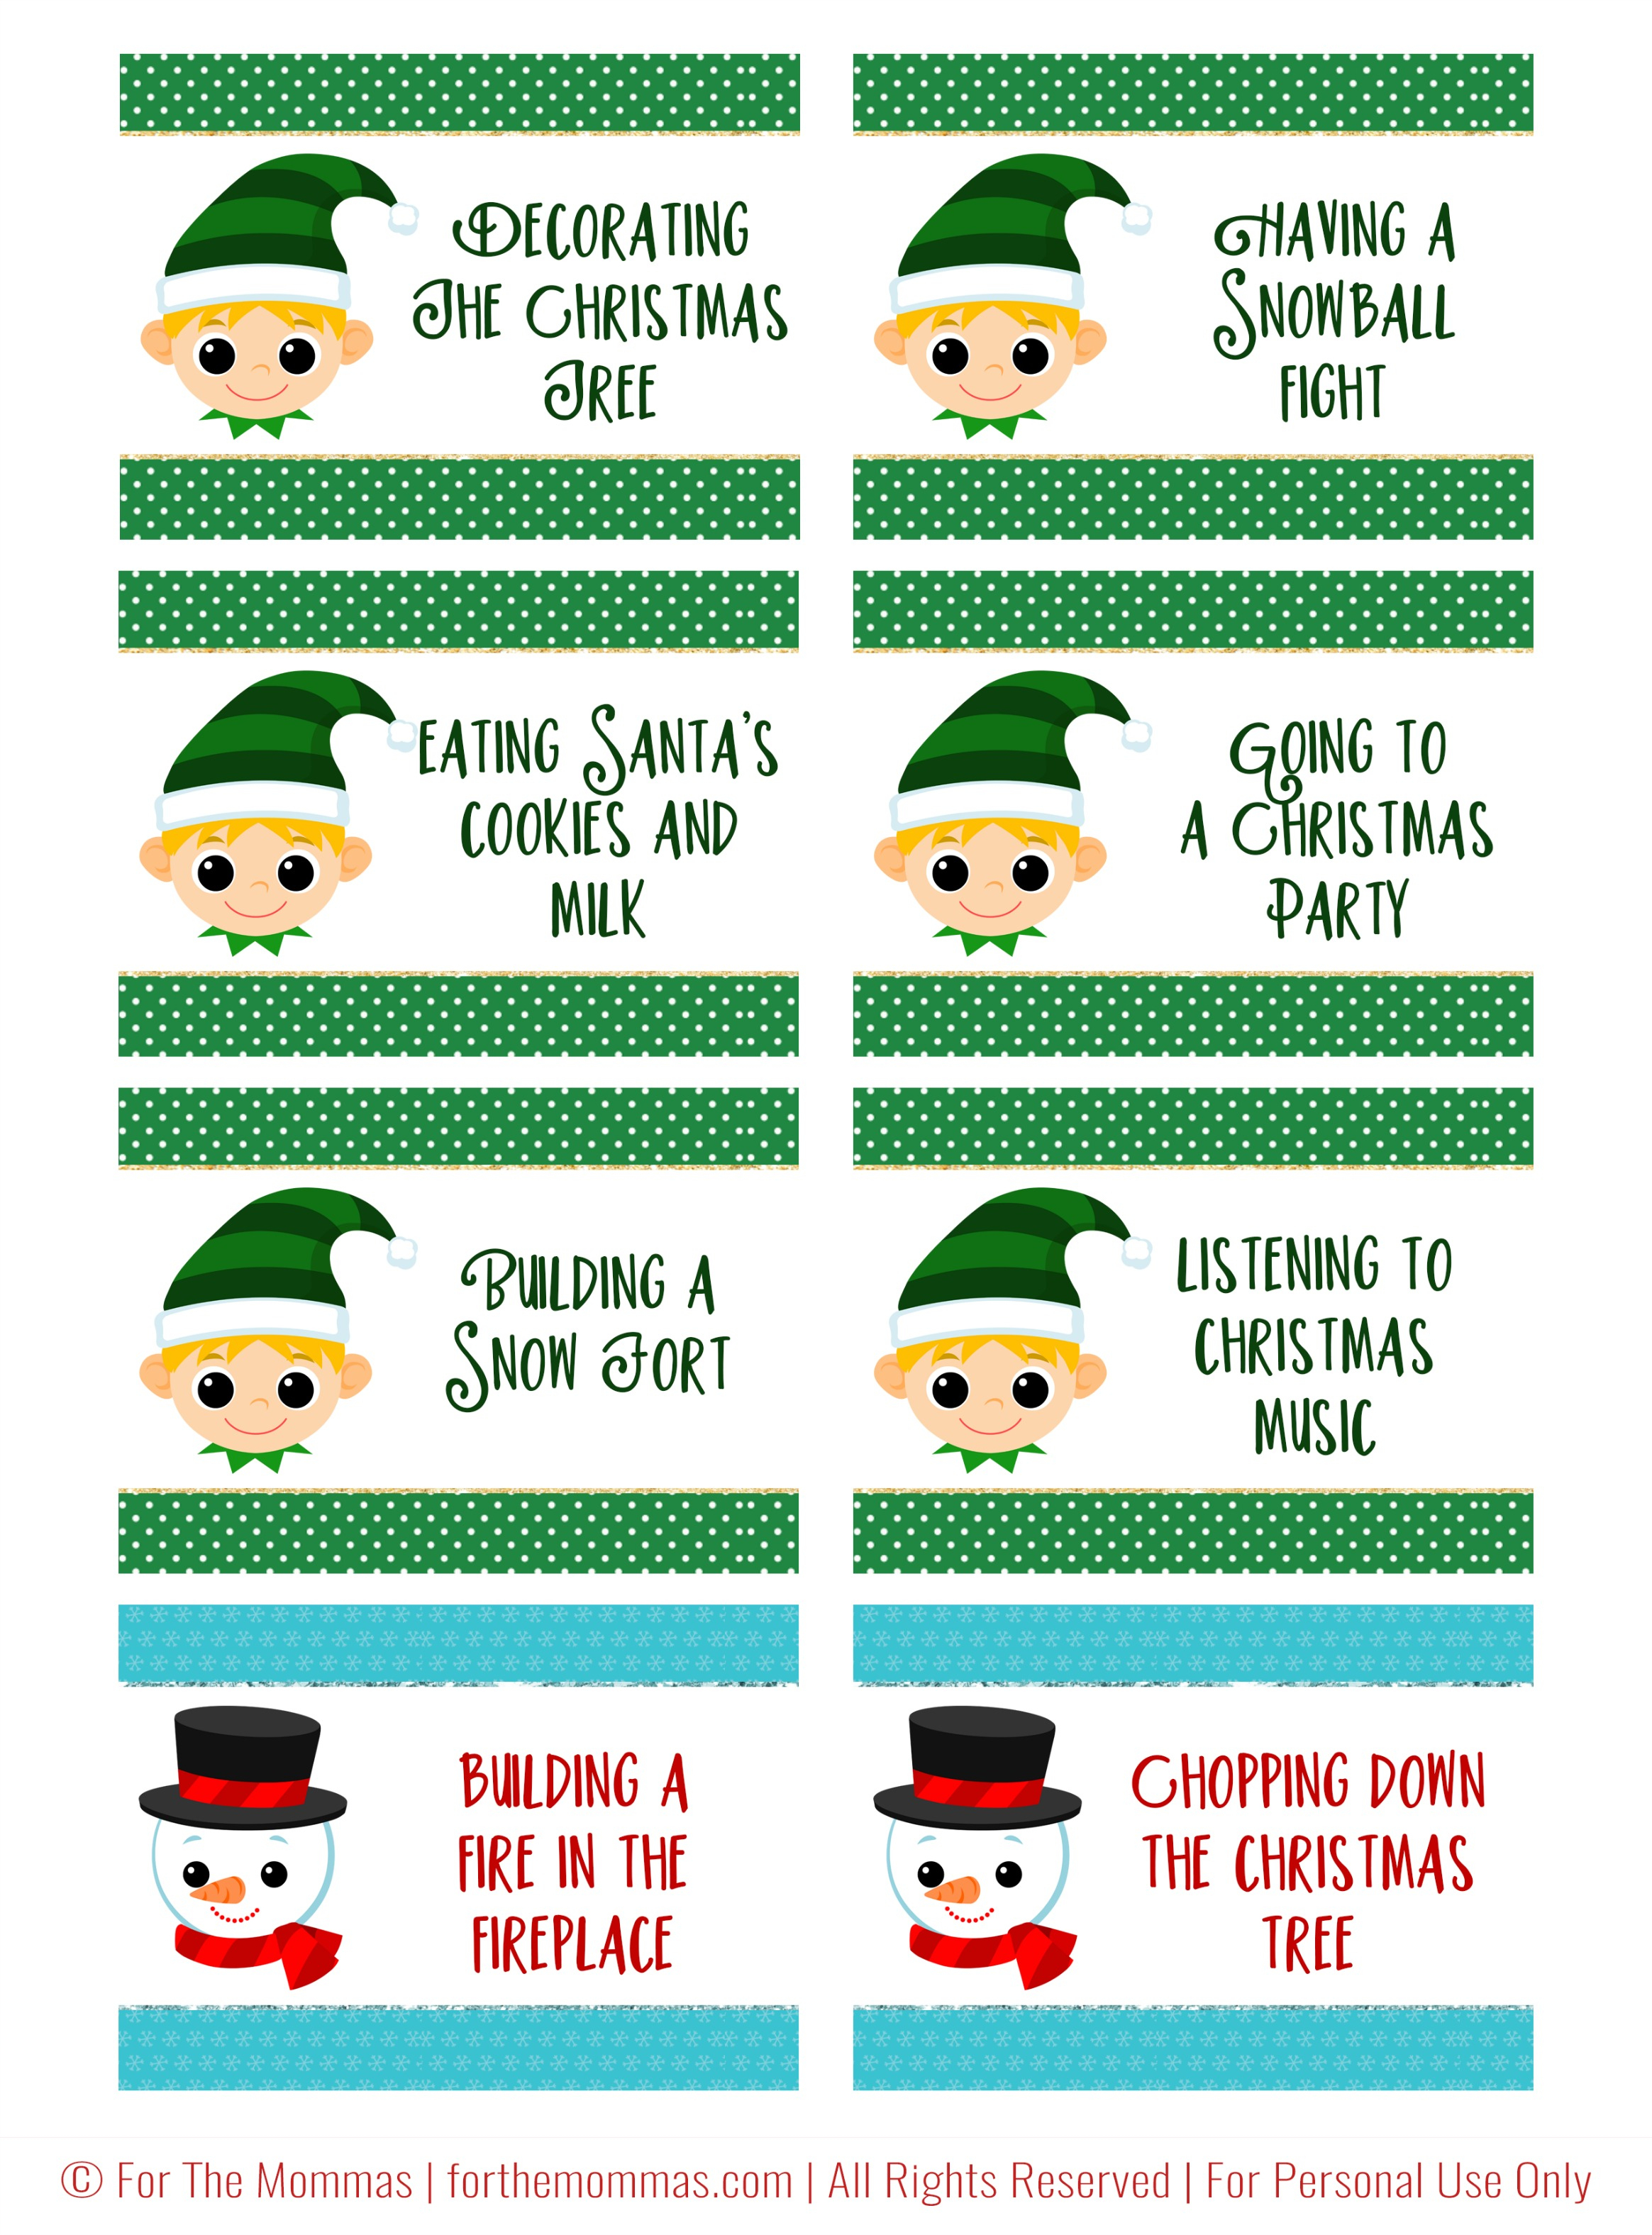 Christmas Charades Free Printable - Start A New Holiday Tradition - Ftm - Free Printable Christmas Charades Cards